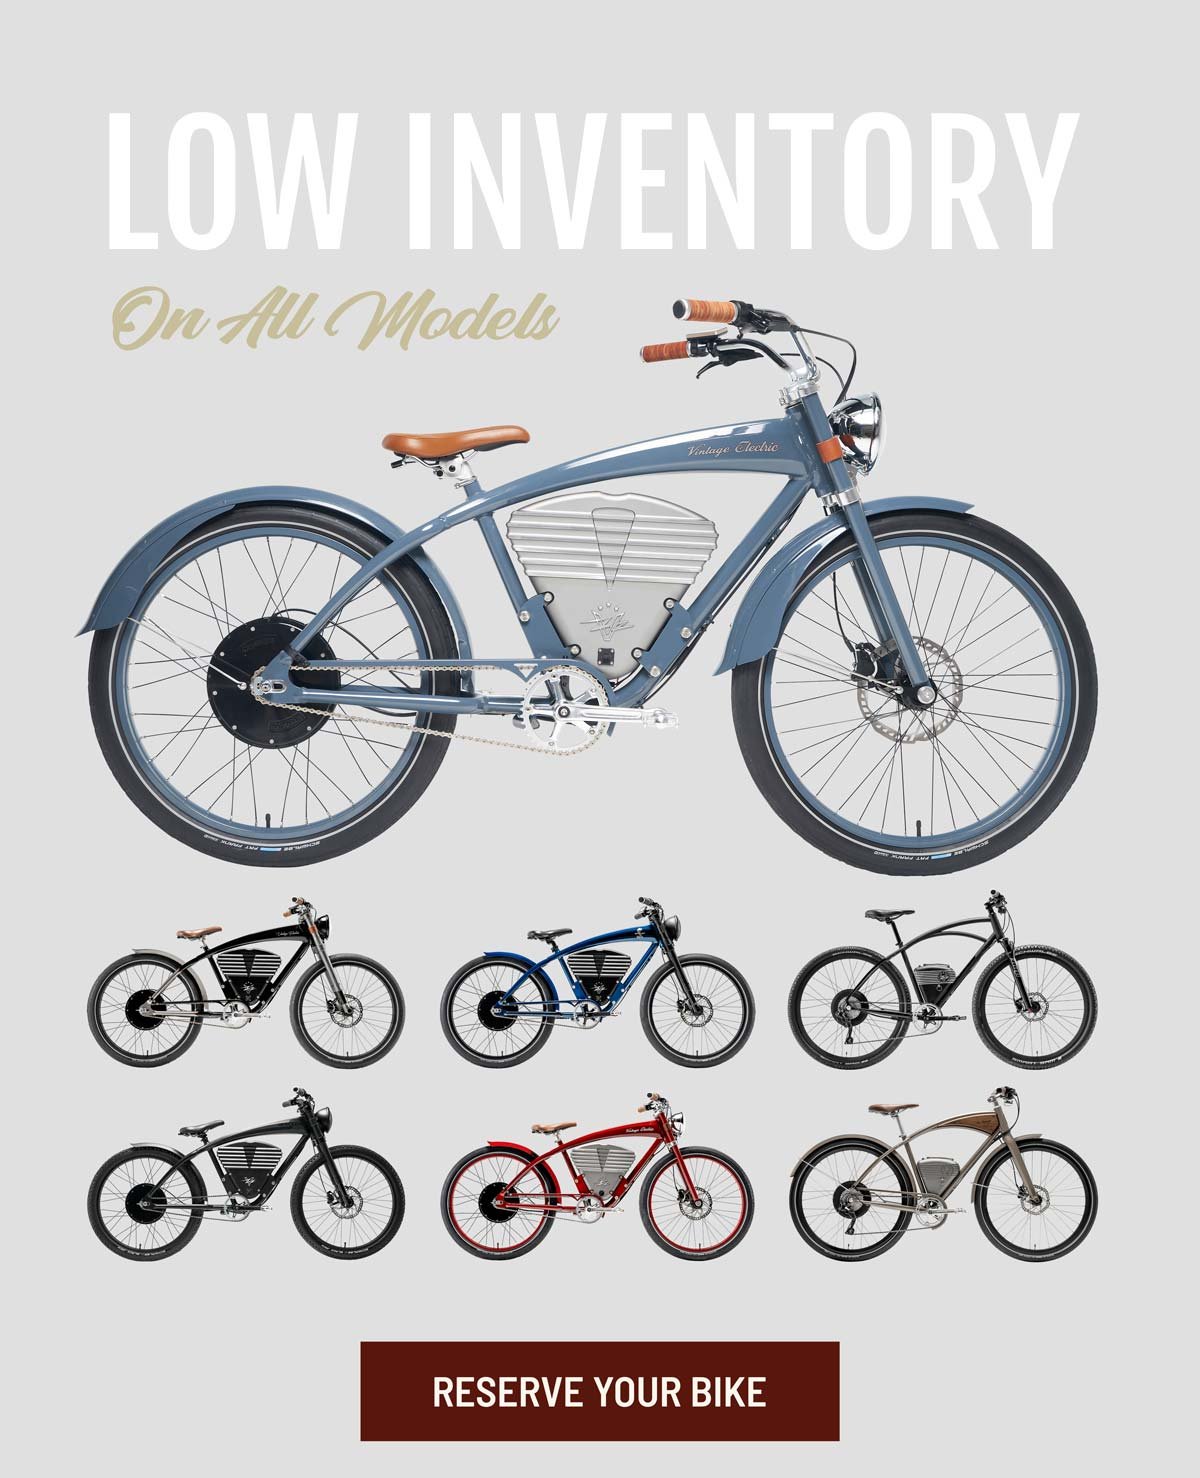 Low Inventory On All Models - RESERVE YOUR BIKE